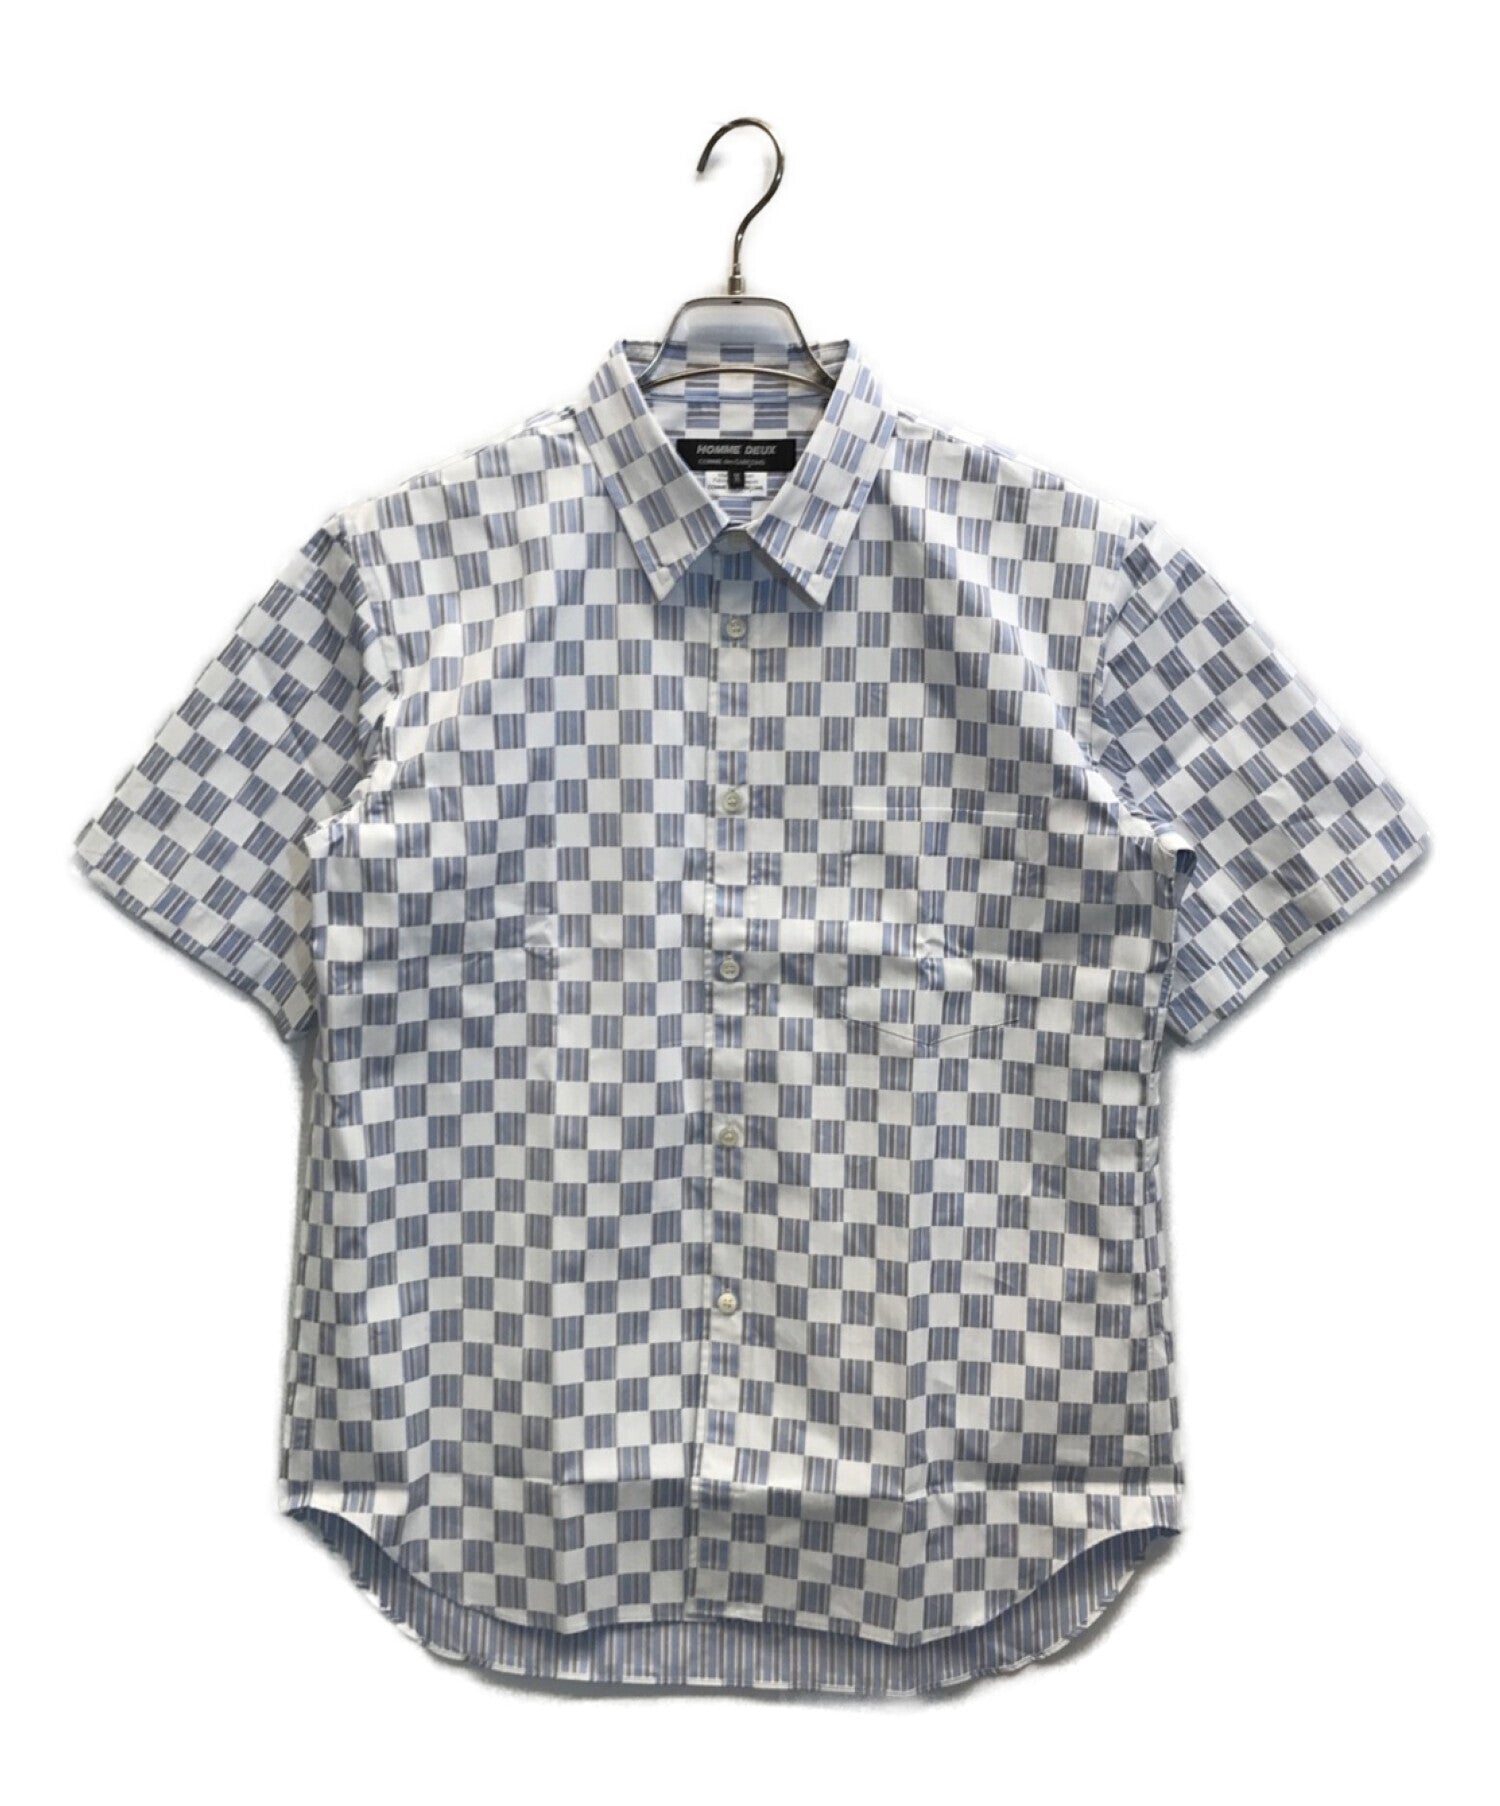 Archive Factory Comme des Garcons Homme Deux Striped Check Checkered Flag Short-sleeved Shirt DK-B043